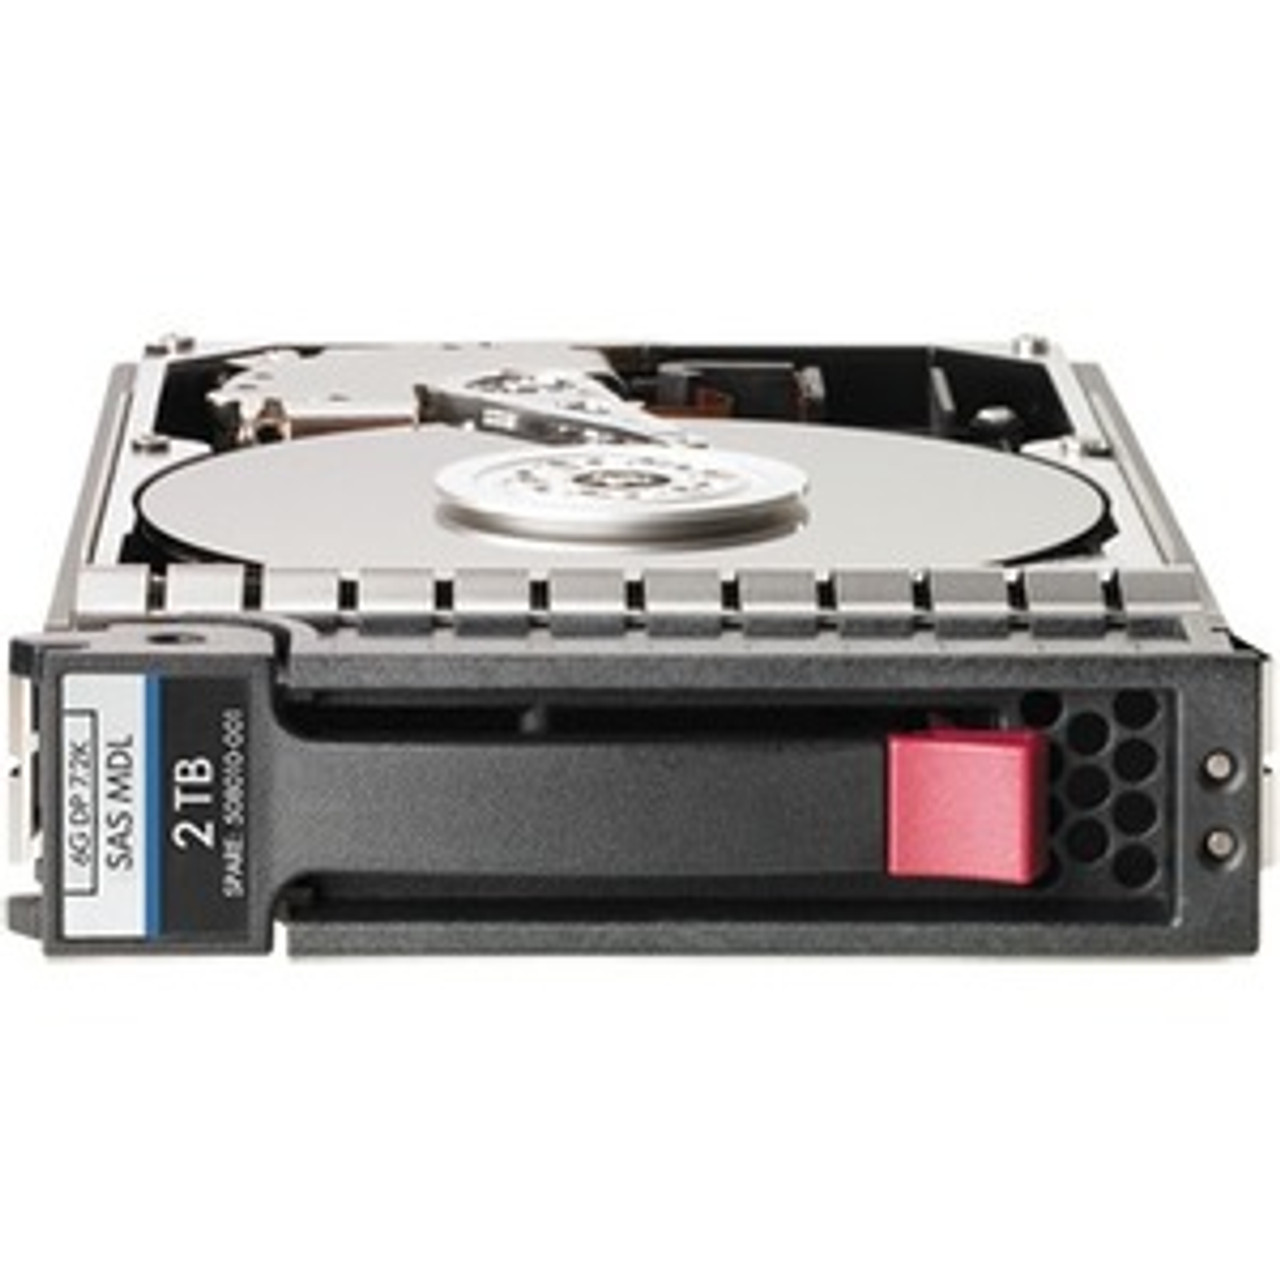 M0S90A 0D1 HPE 8TB 7200RPM SAS 12Gbps Dual Port Midline Hot Swap (512e) 3.5-inch Internal Hard Drive for MSA Storage M0S90A